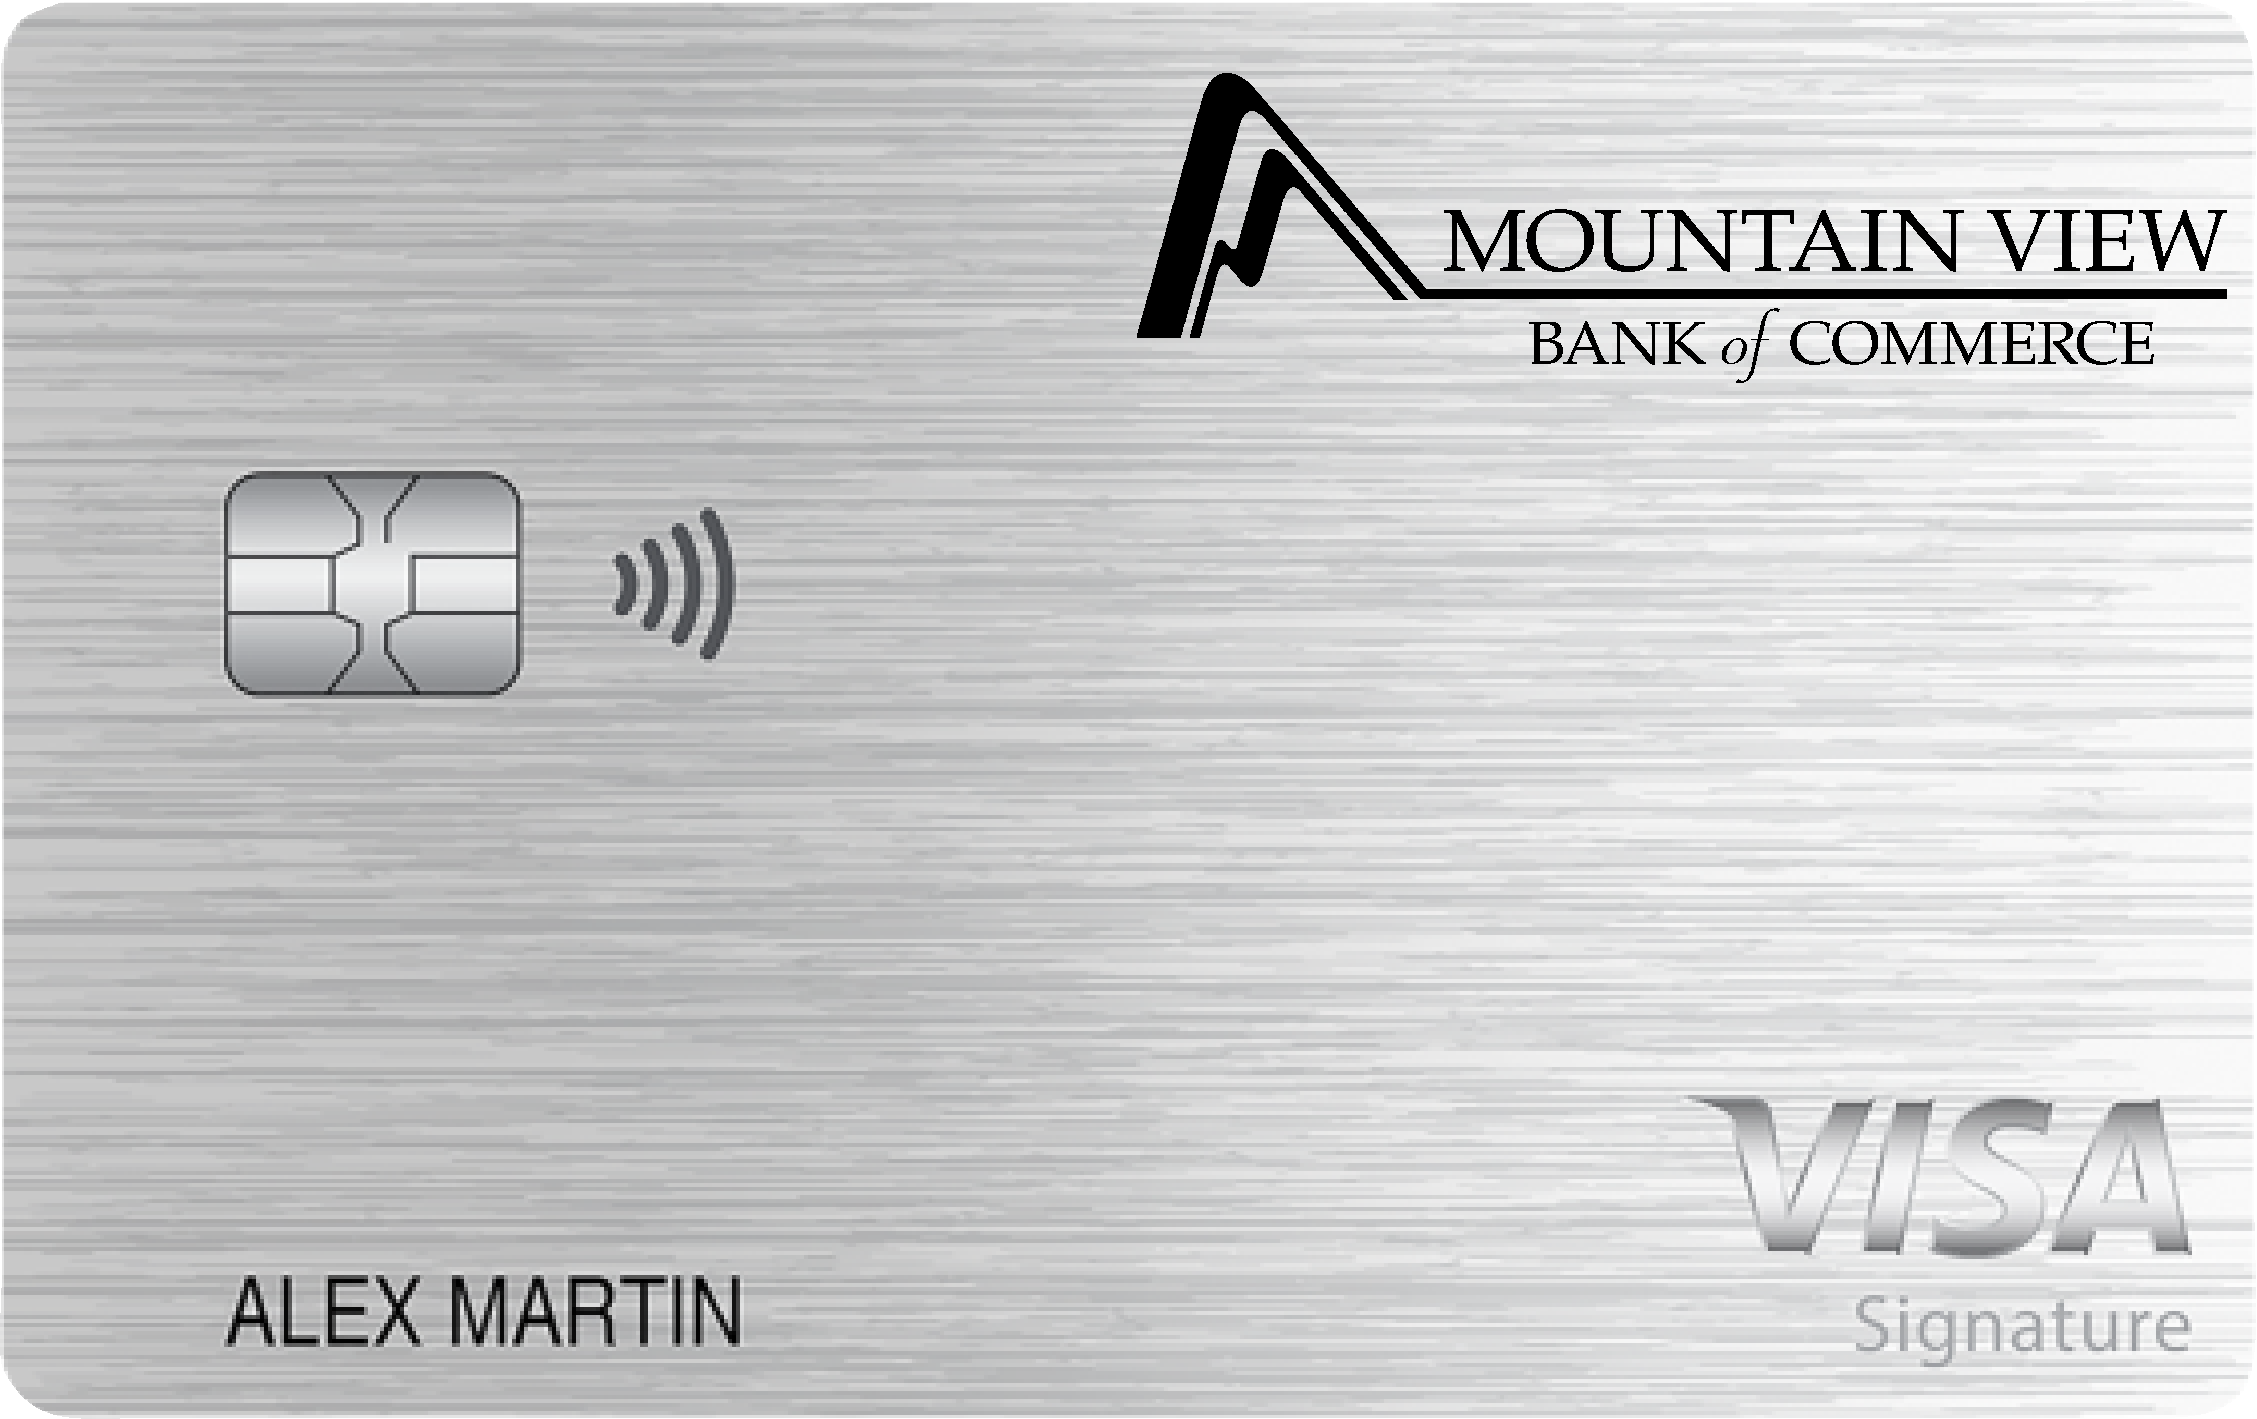 Mountain View Bank of Commerce Everyday Rewards+ Card